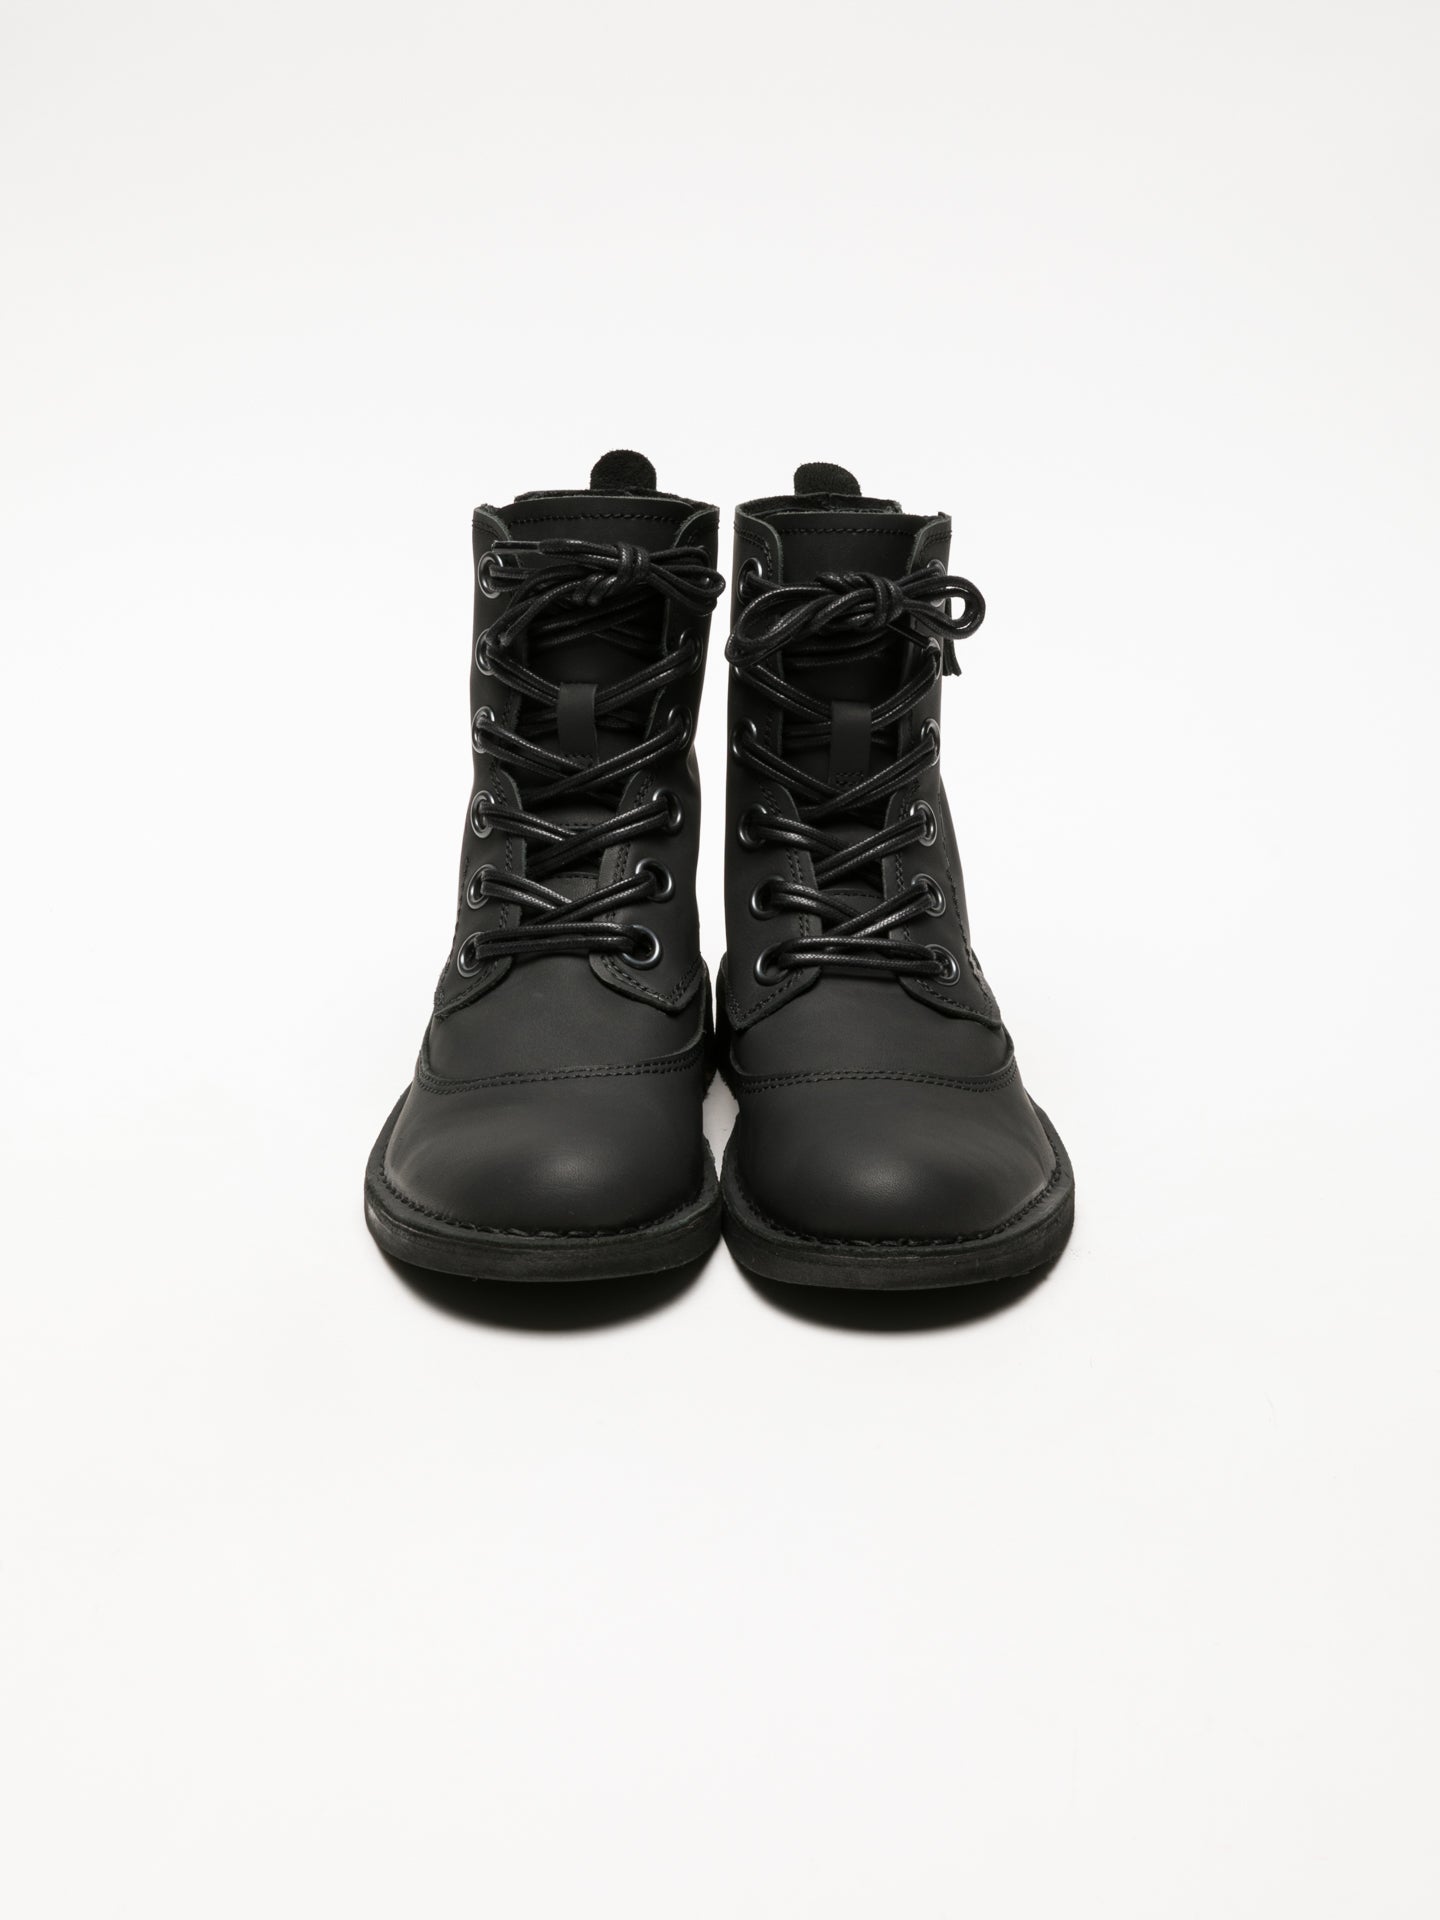 Fly London Coal Black Lace-up Ankle Boots